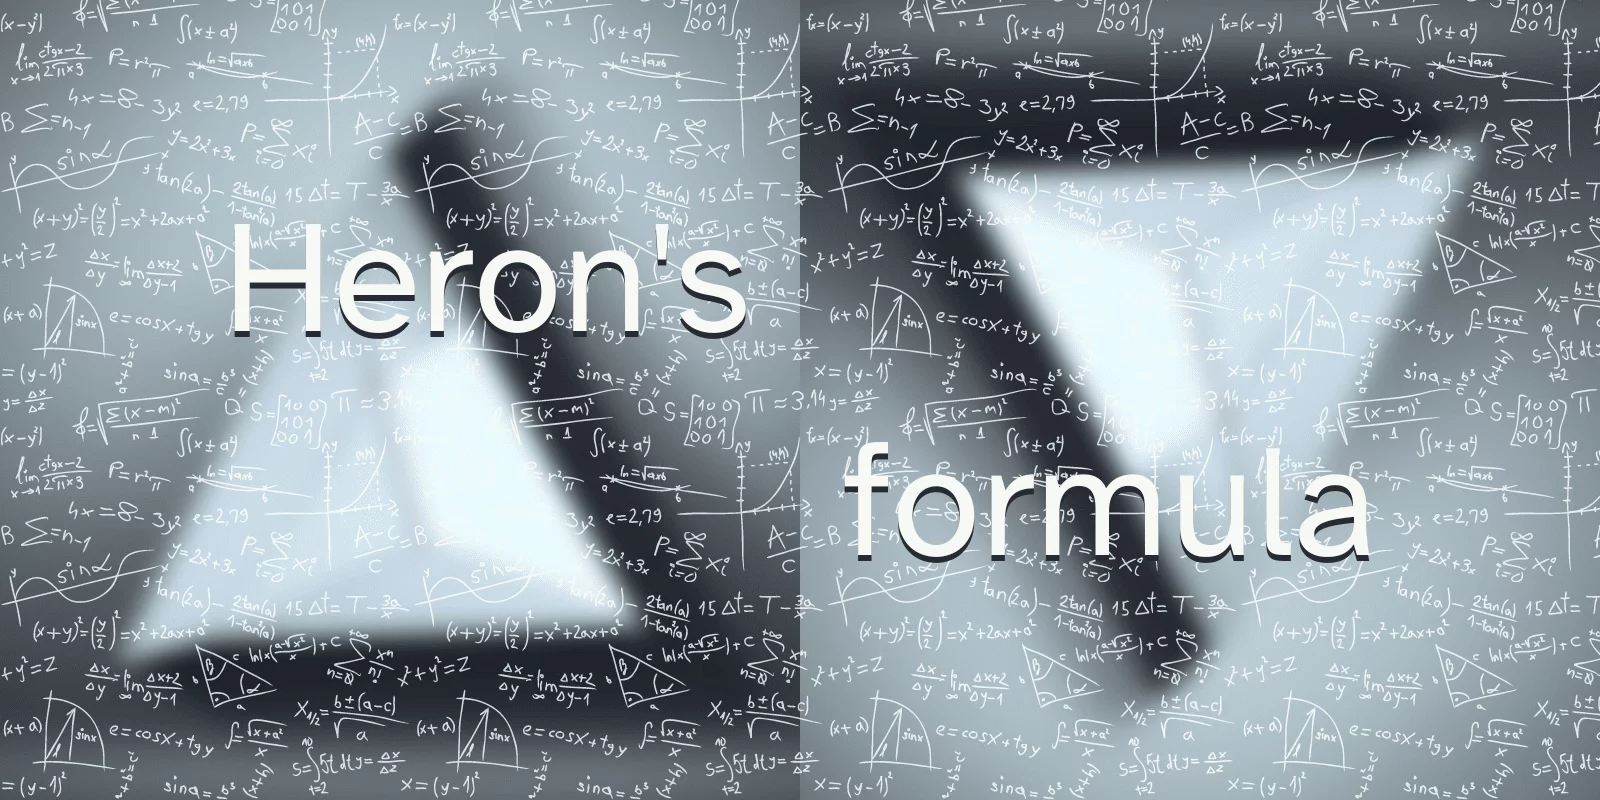 A blurred image of two triangles with many arbitrary mathematical formulas floating in front of them, and the words “Heron's formula” in big white letters in the centre.